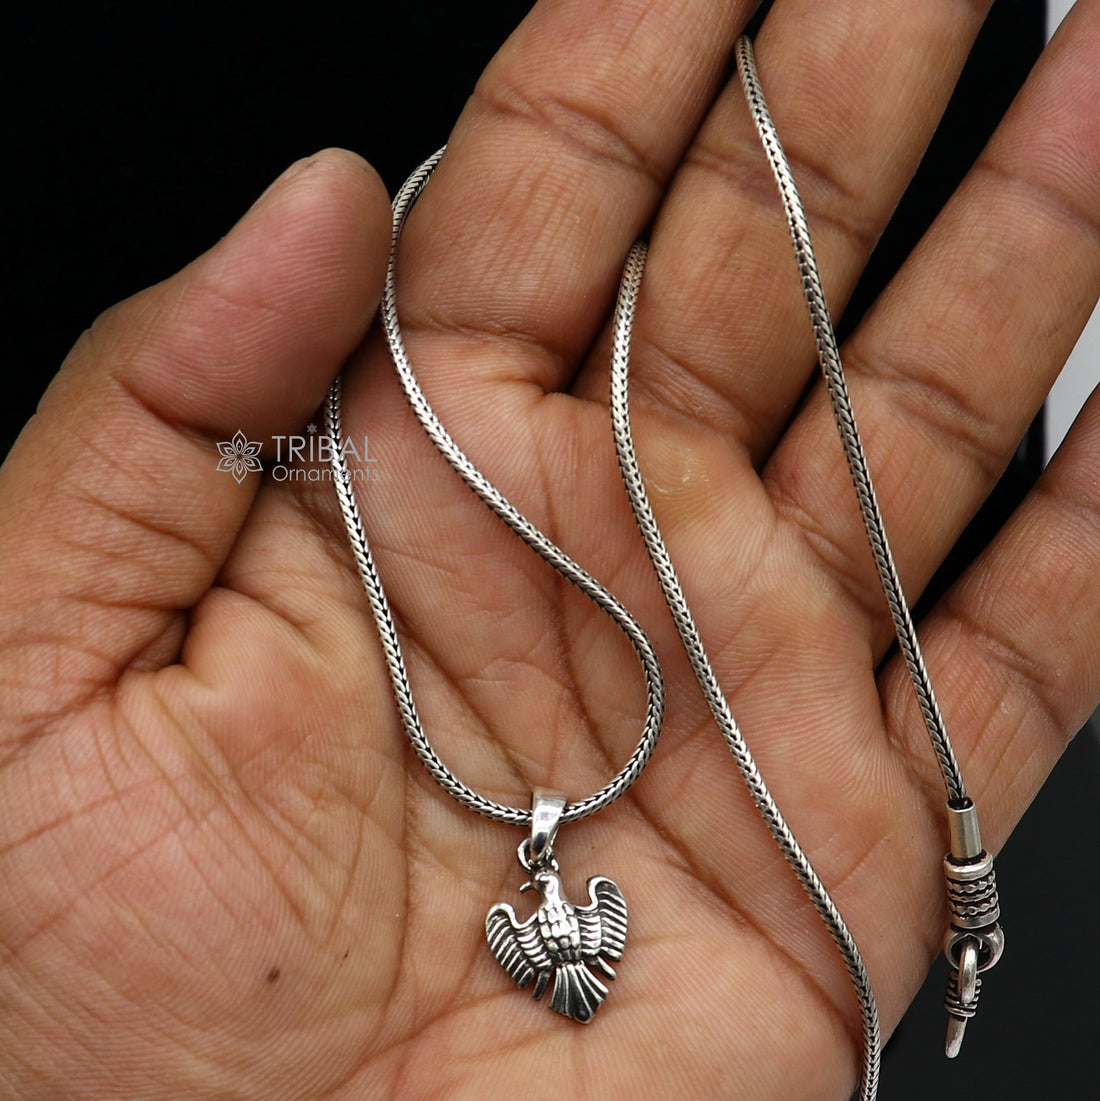 Amazing 925 sterling silver handmade dove design pendant, high quality silver small pendant symbol of peace, love, and purity  nsp669 - TRIBAL ORNAMENTS